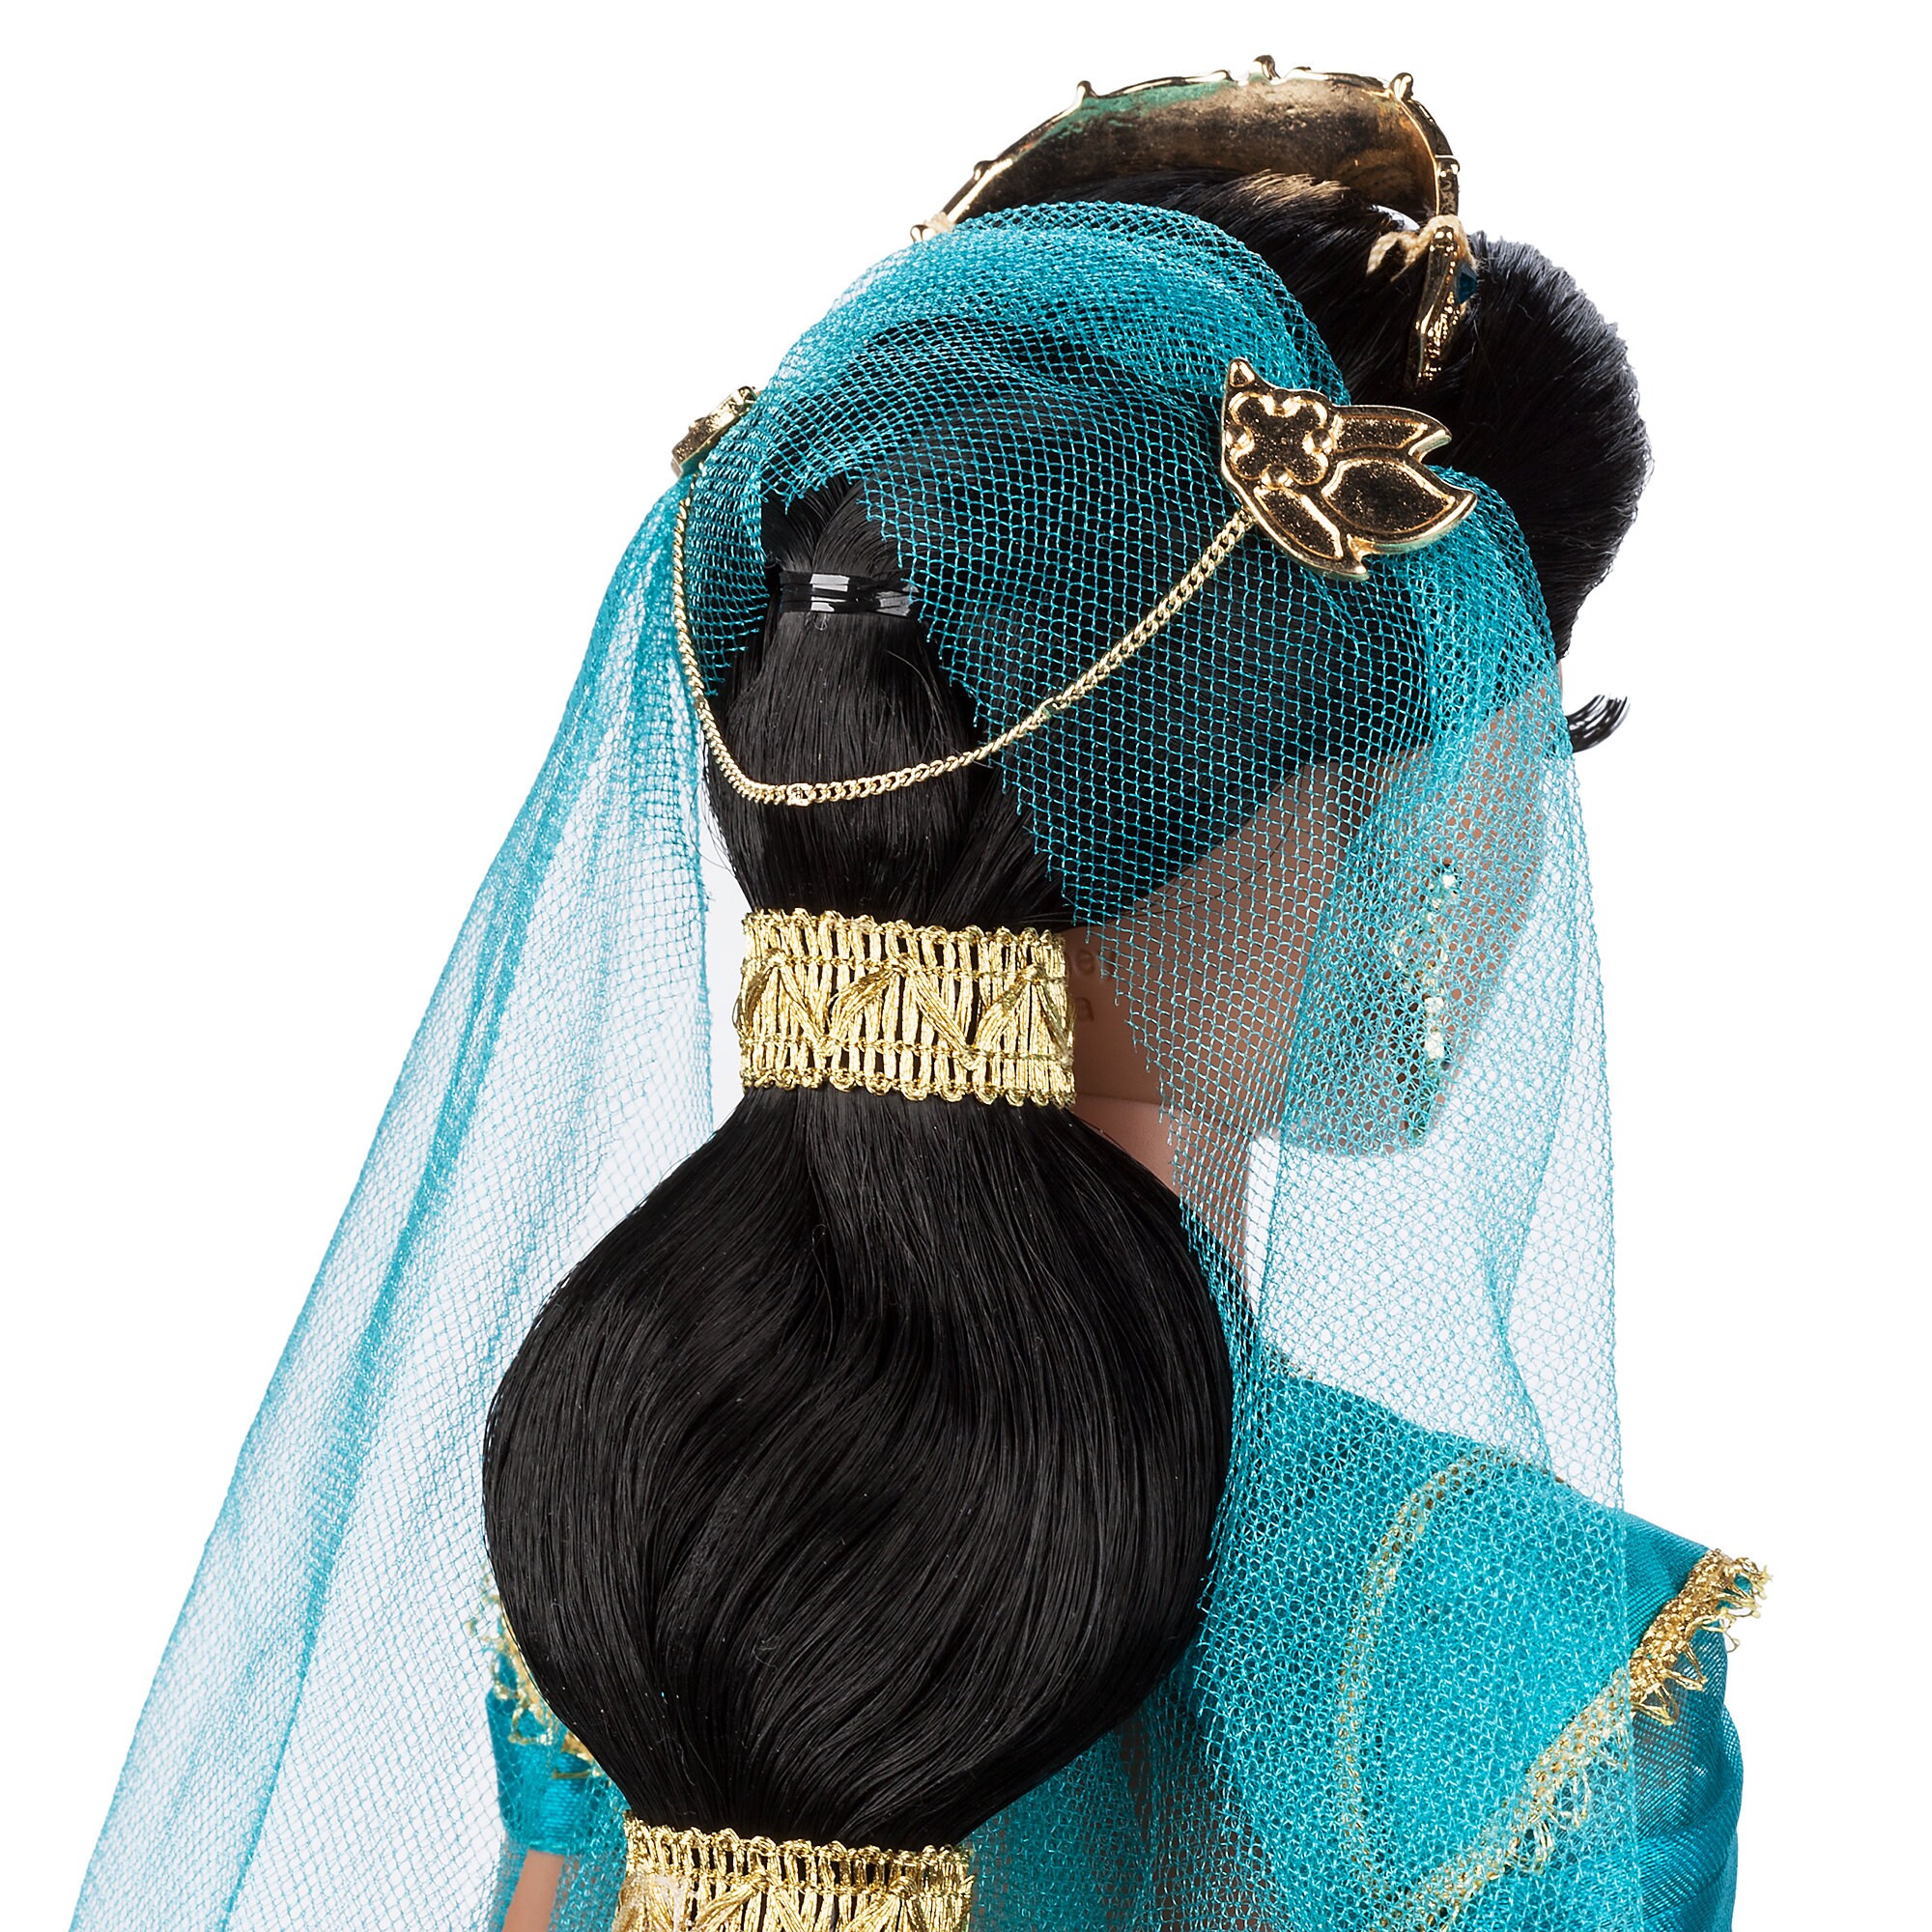 Jasmine Limited Edition Doll Aladdin Live Action Film 17 Is Now